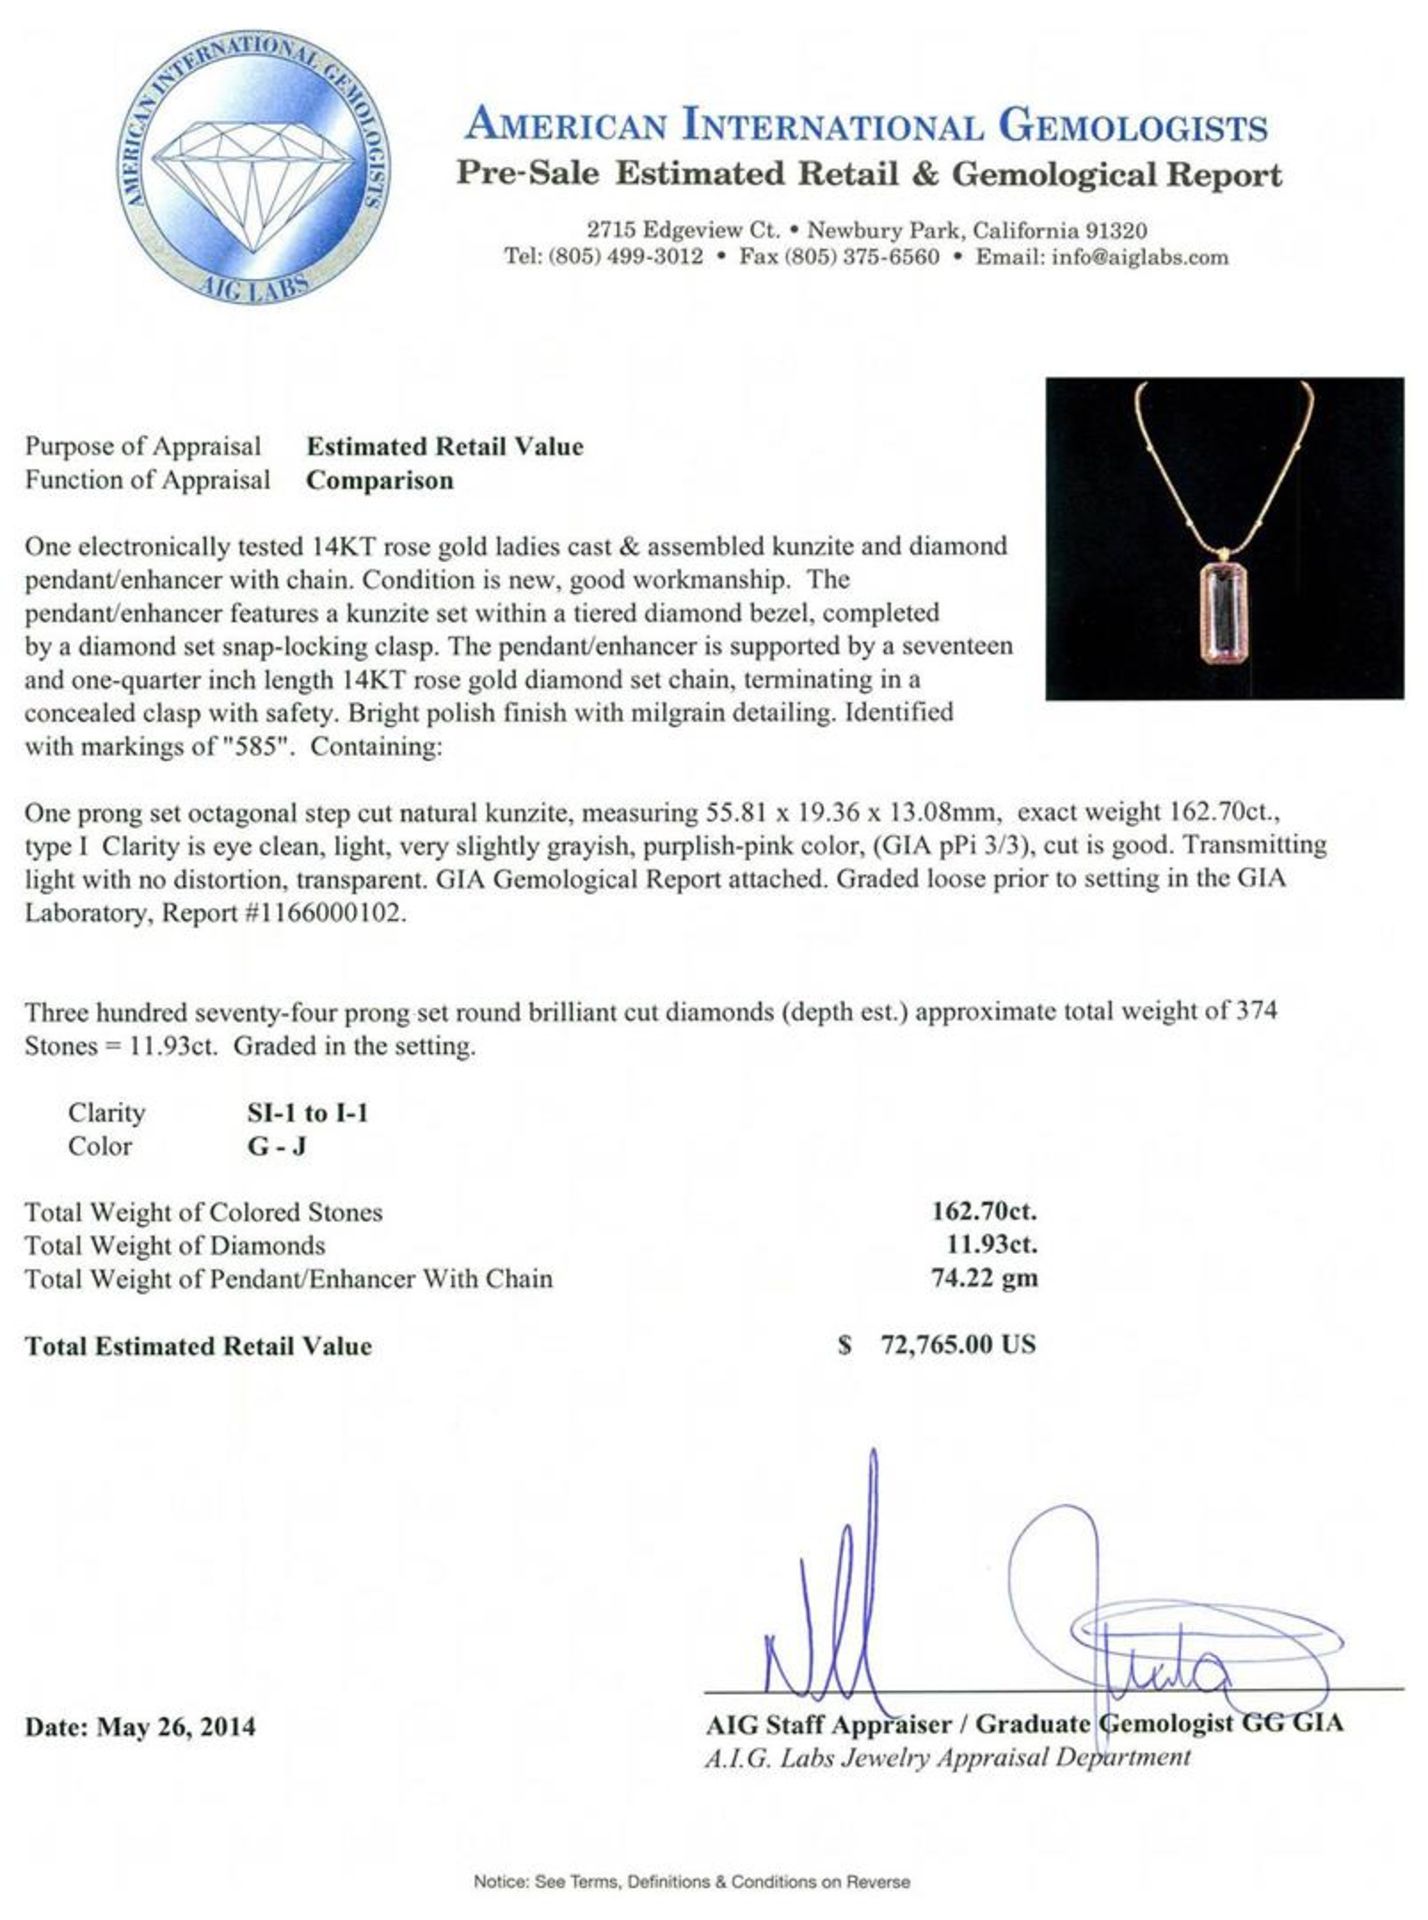 14KT Rose Gold GIA Certified 162.70 ctw Kunzite and Diamond Pendant With Chain - Image 4 of 5